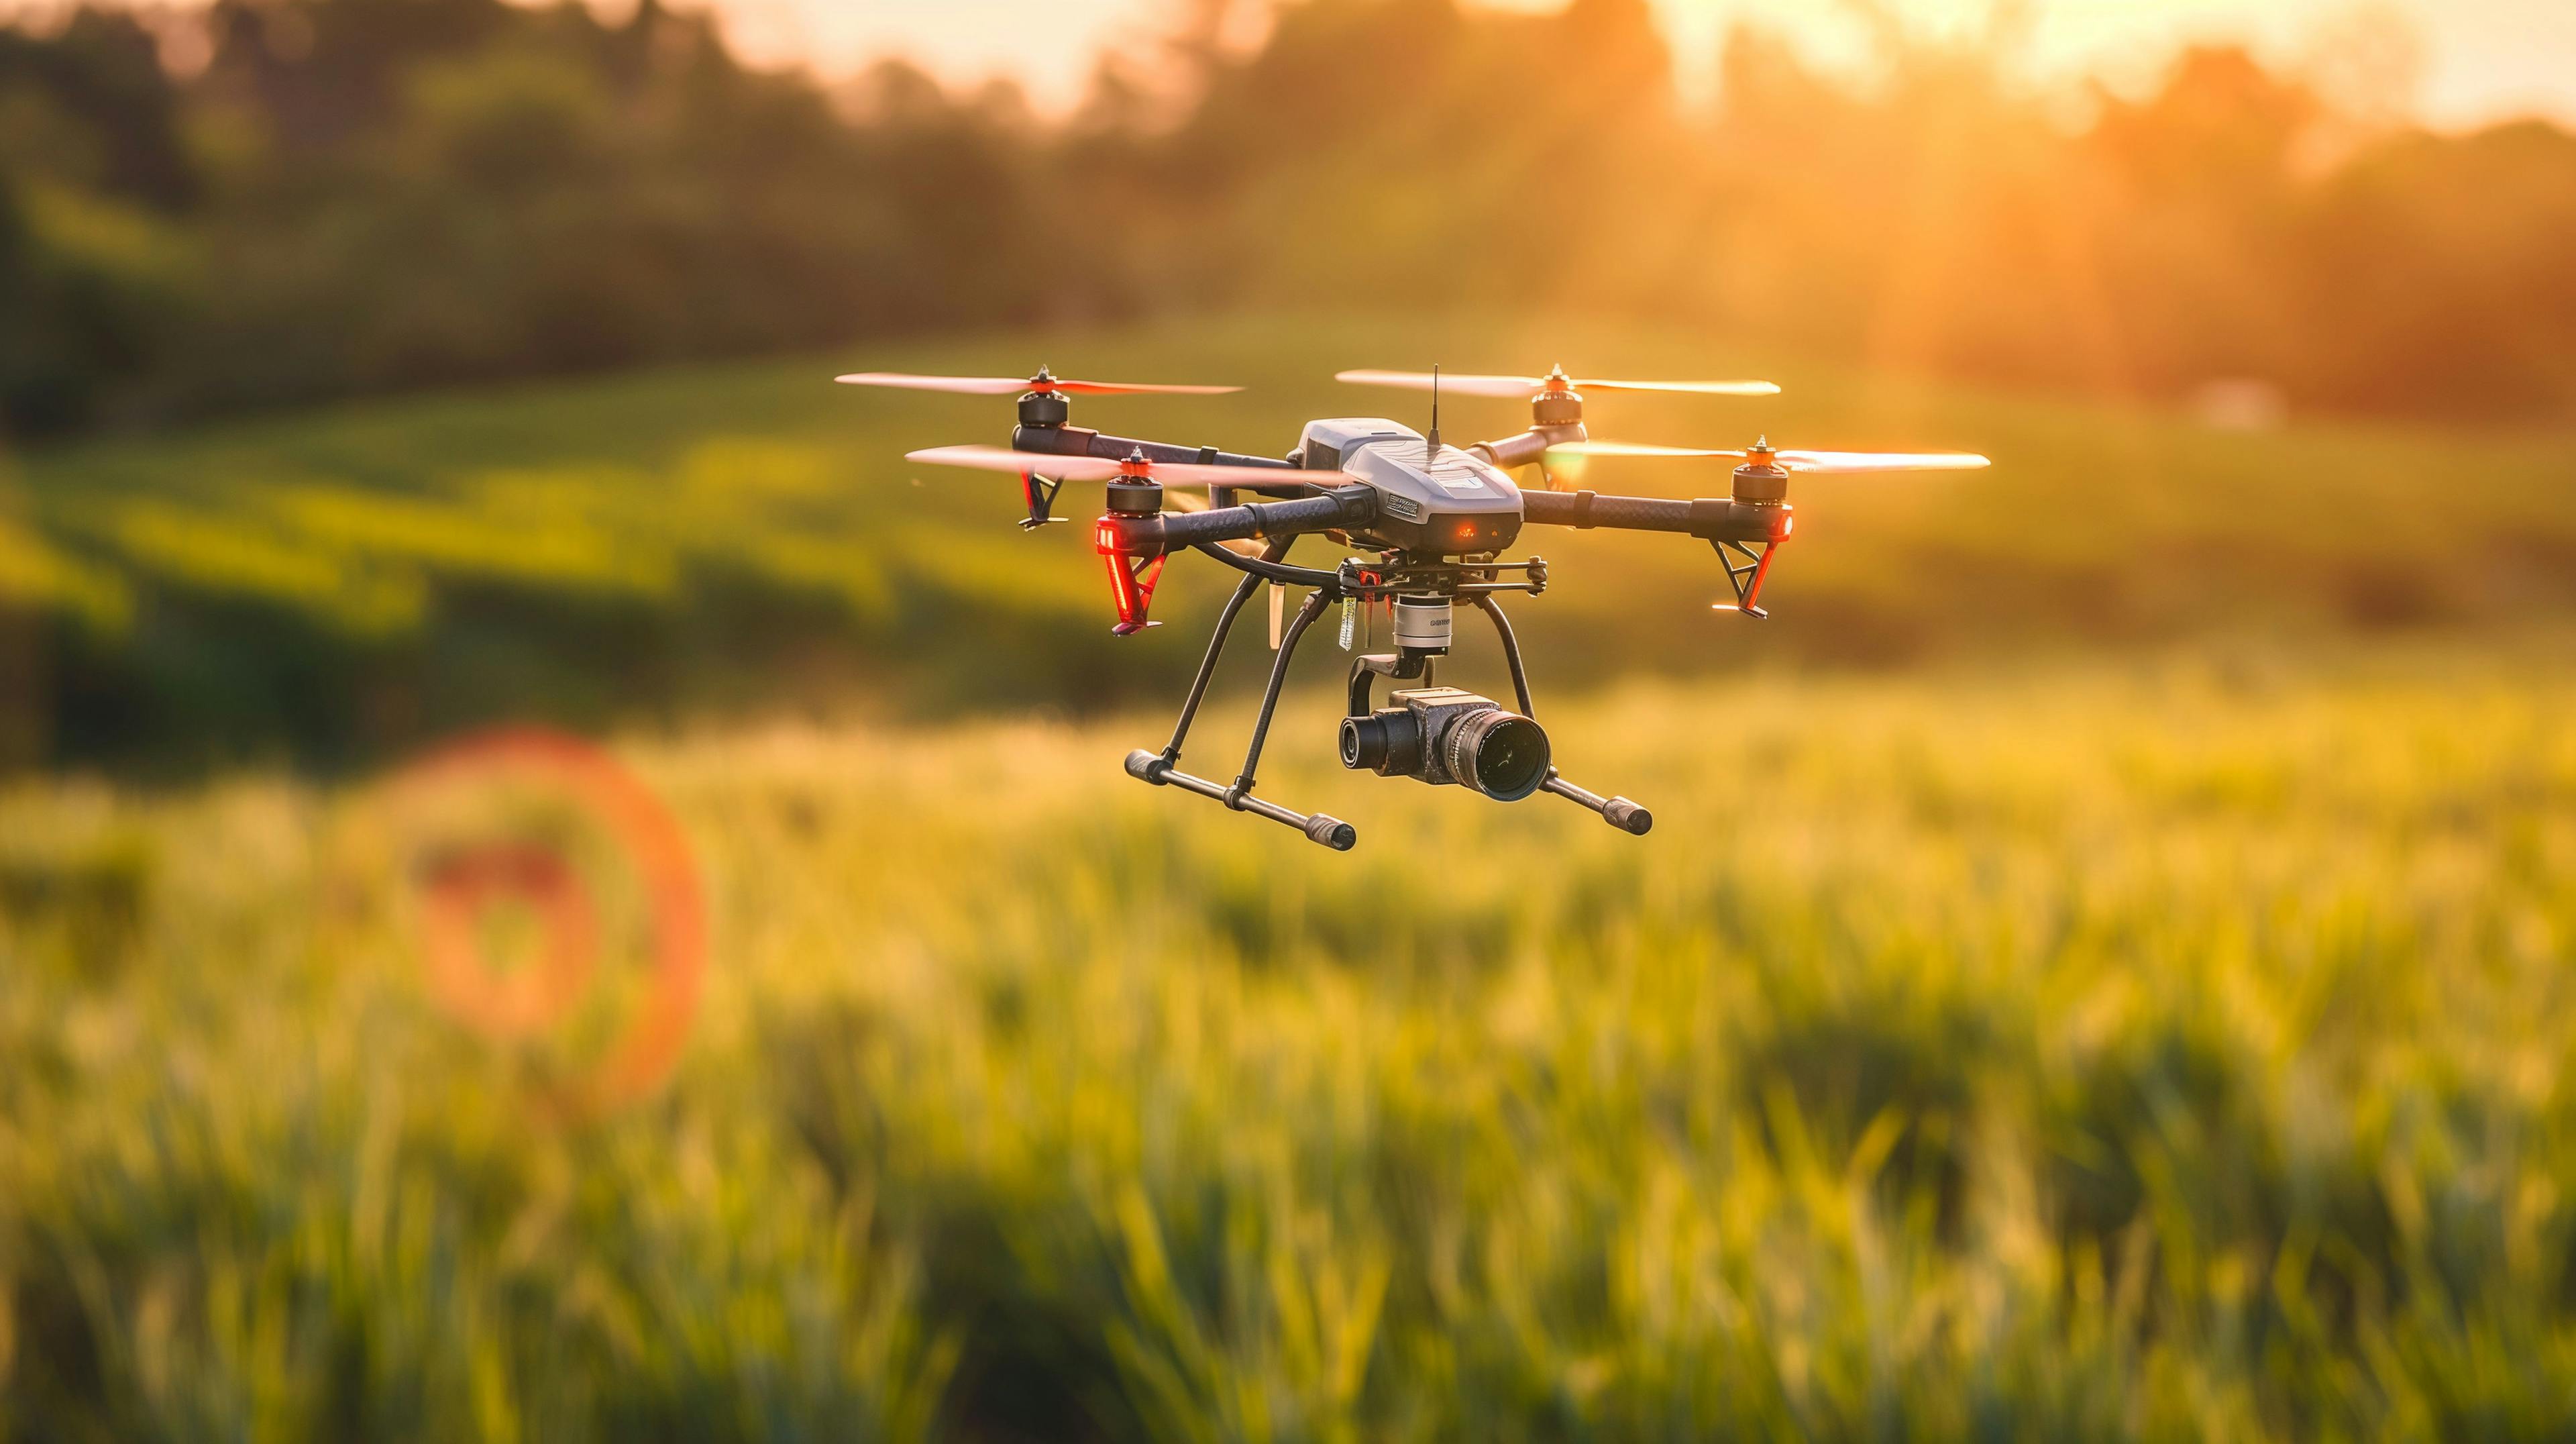 Remote sensing technologies for early pest detection. Generated with AI. | Image Credit: © Maksym - stock.adobe.com